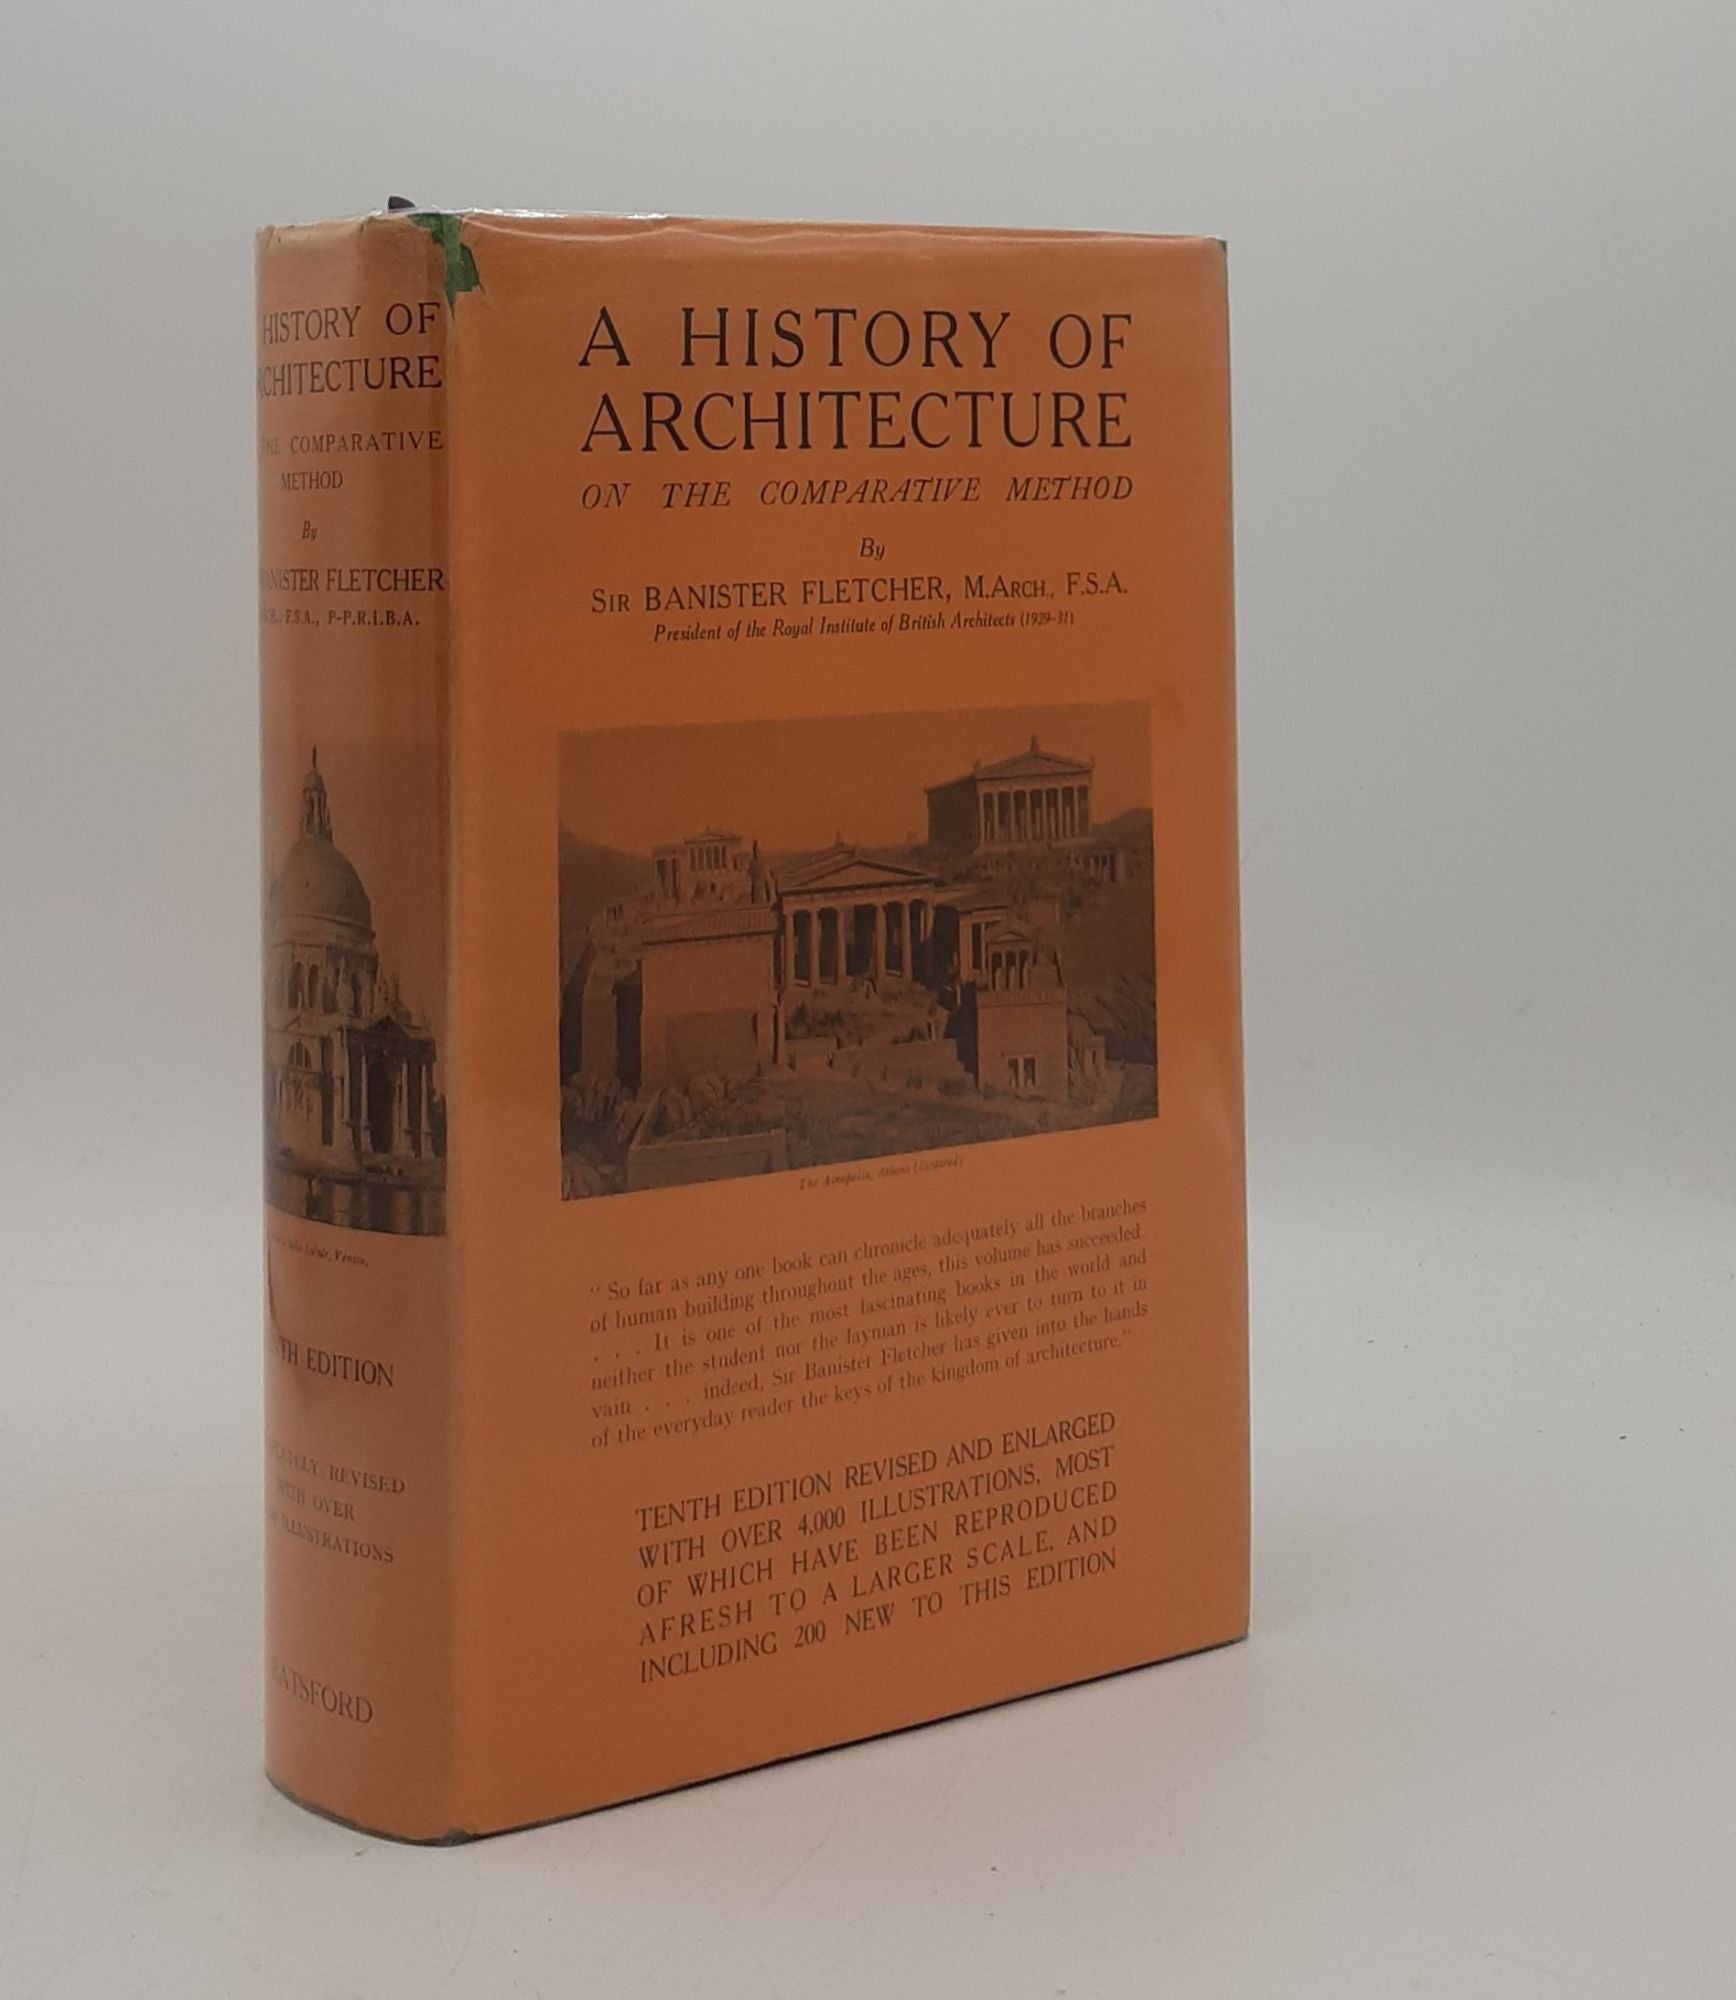 FLETCHER Sir Banister - A History of Architecture on the Comparative Method